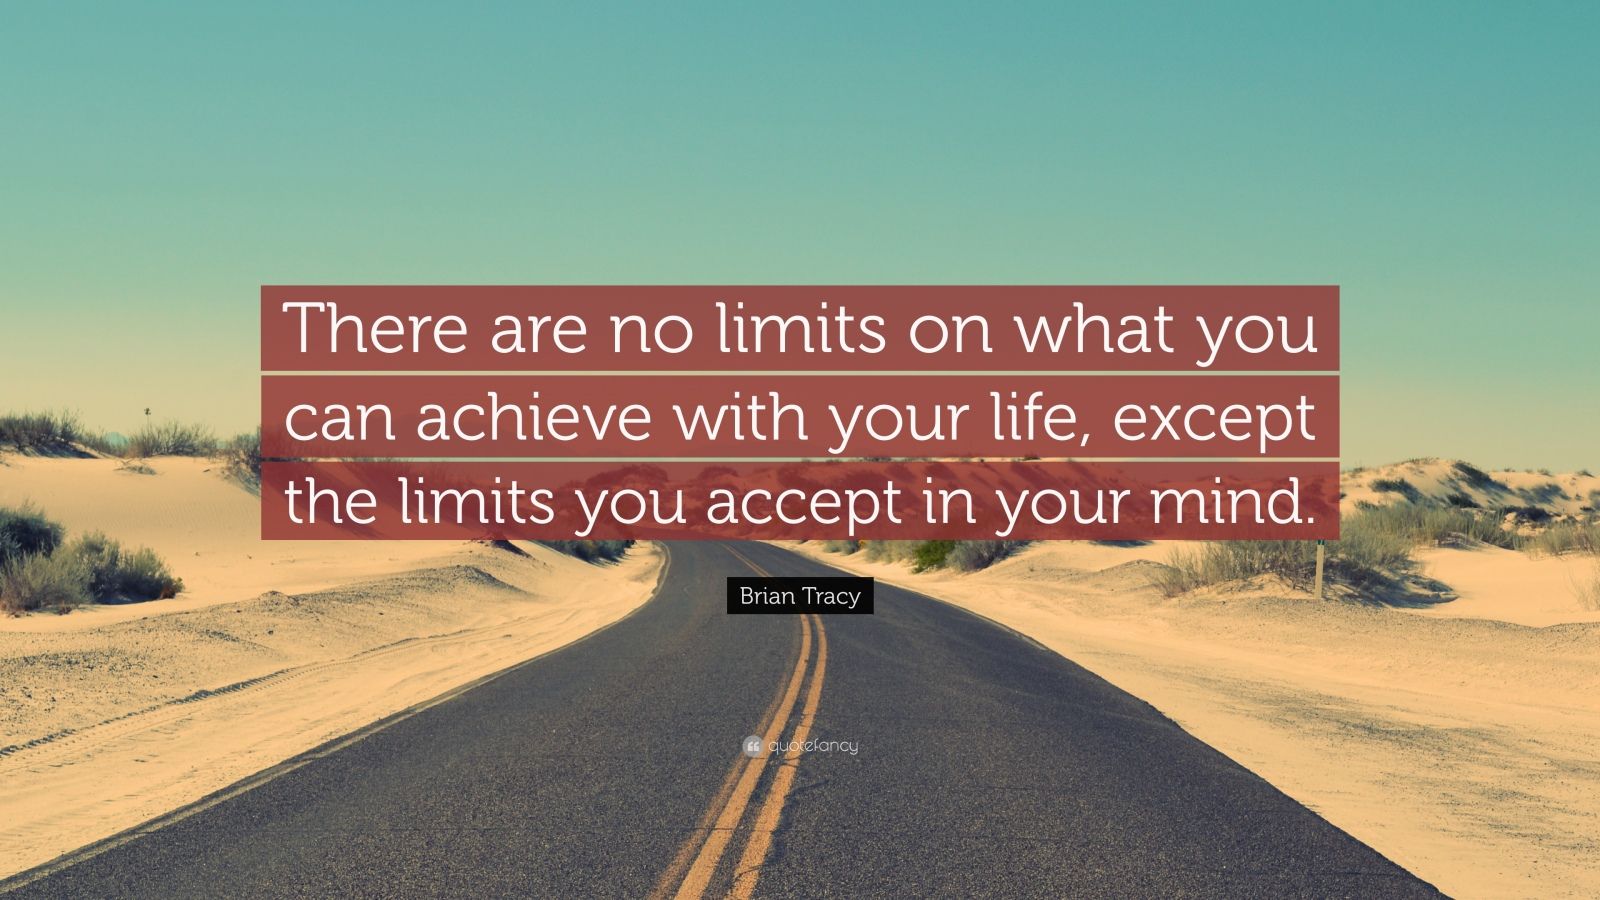 Brian Tracy Quote: “There are no limits on what you can achieve with